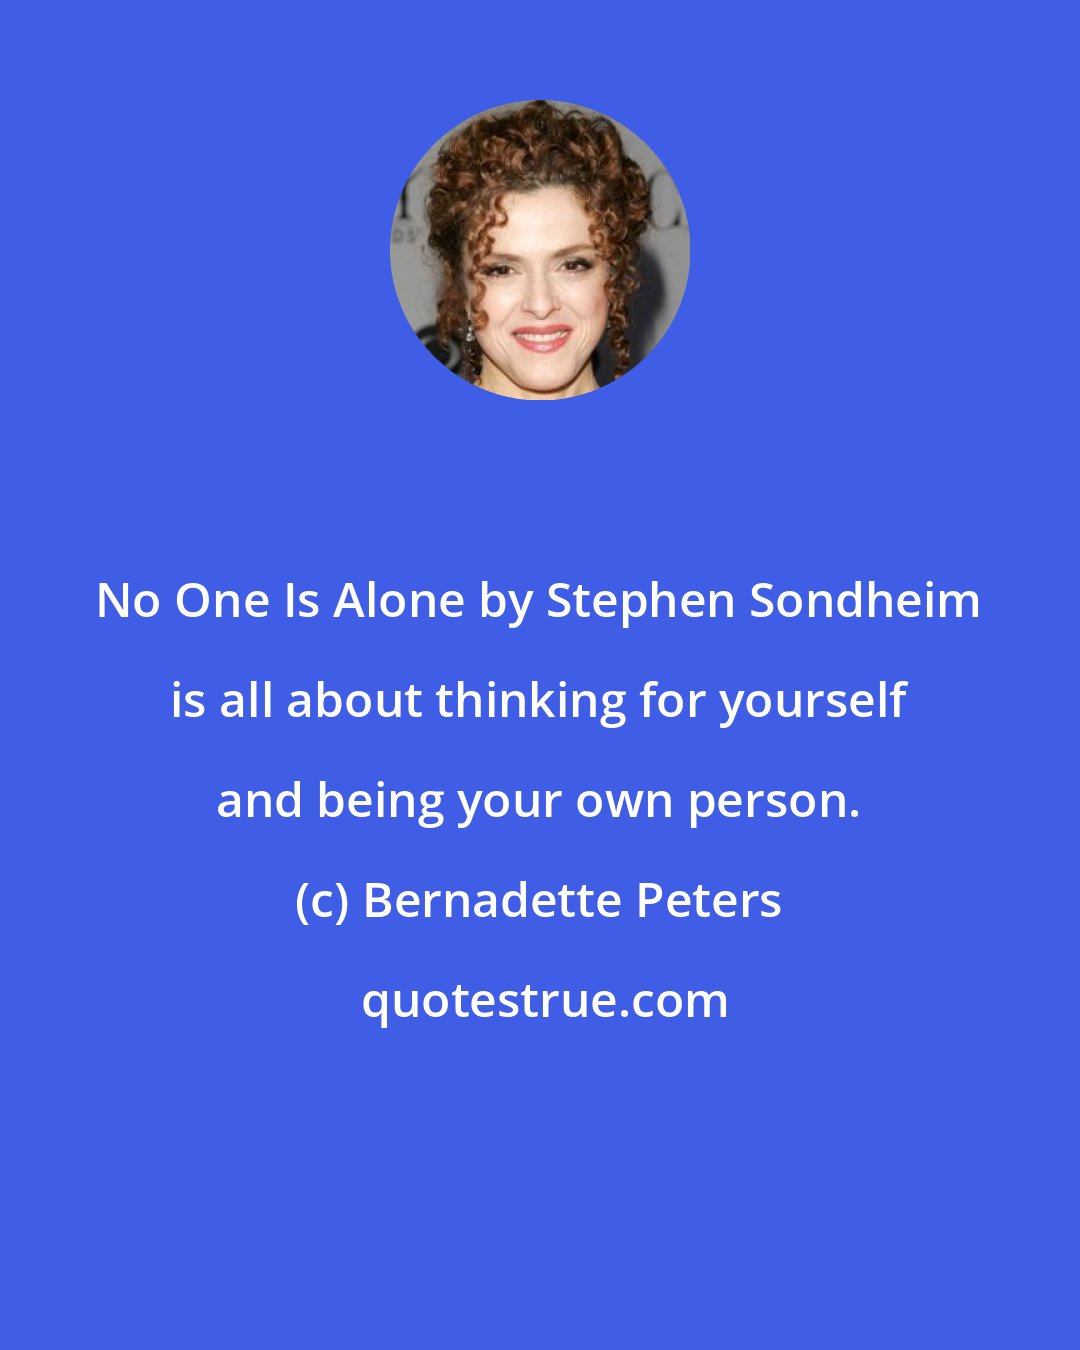 Bernadette Peters: No One Is Alone by Stephen Sondheim is all about thinking for yourself and being your own person.